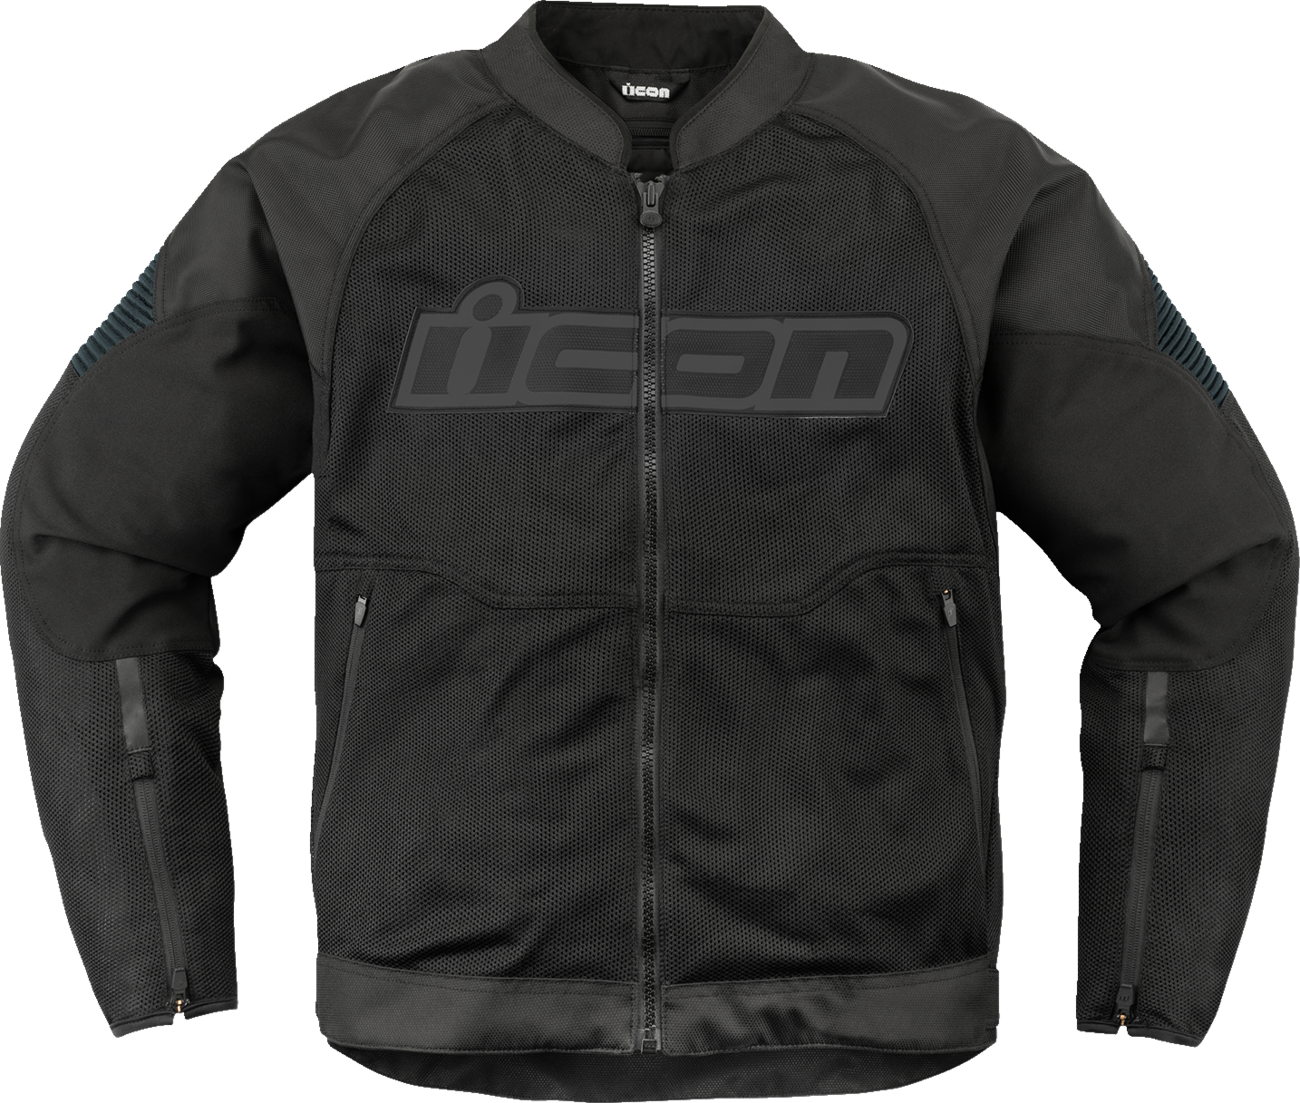 ICON Overlord3 Mesh™ CE Jacket - Black - 2XL 2820-6734